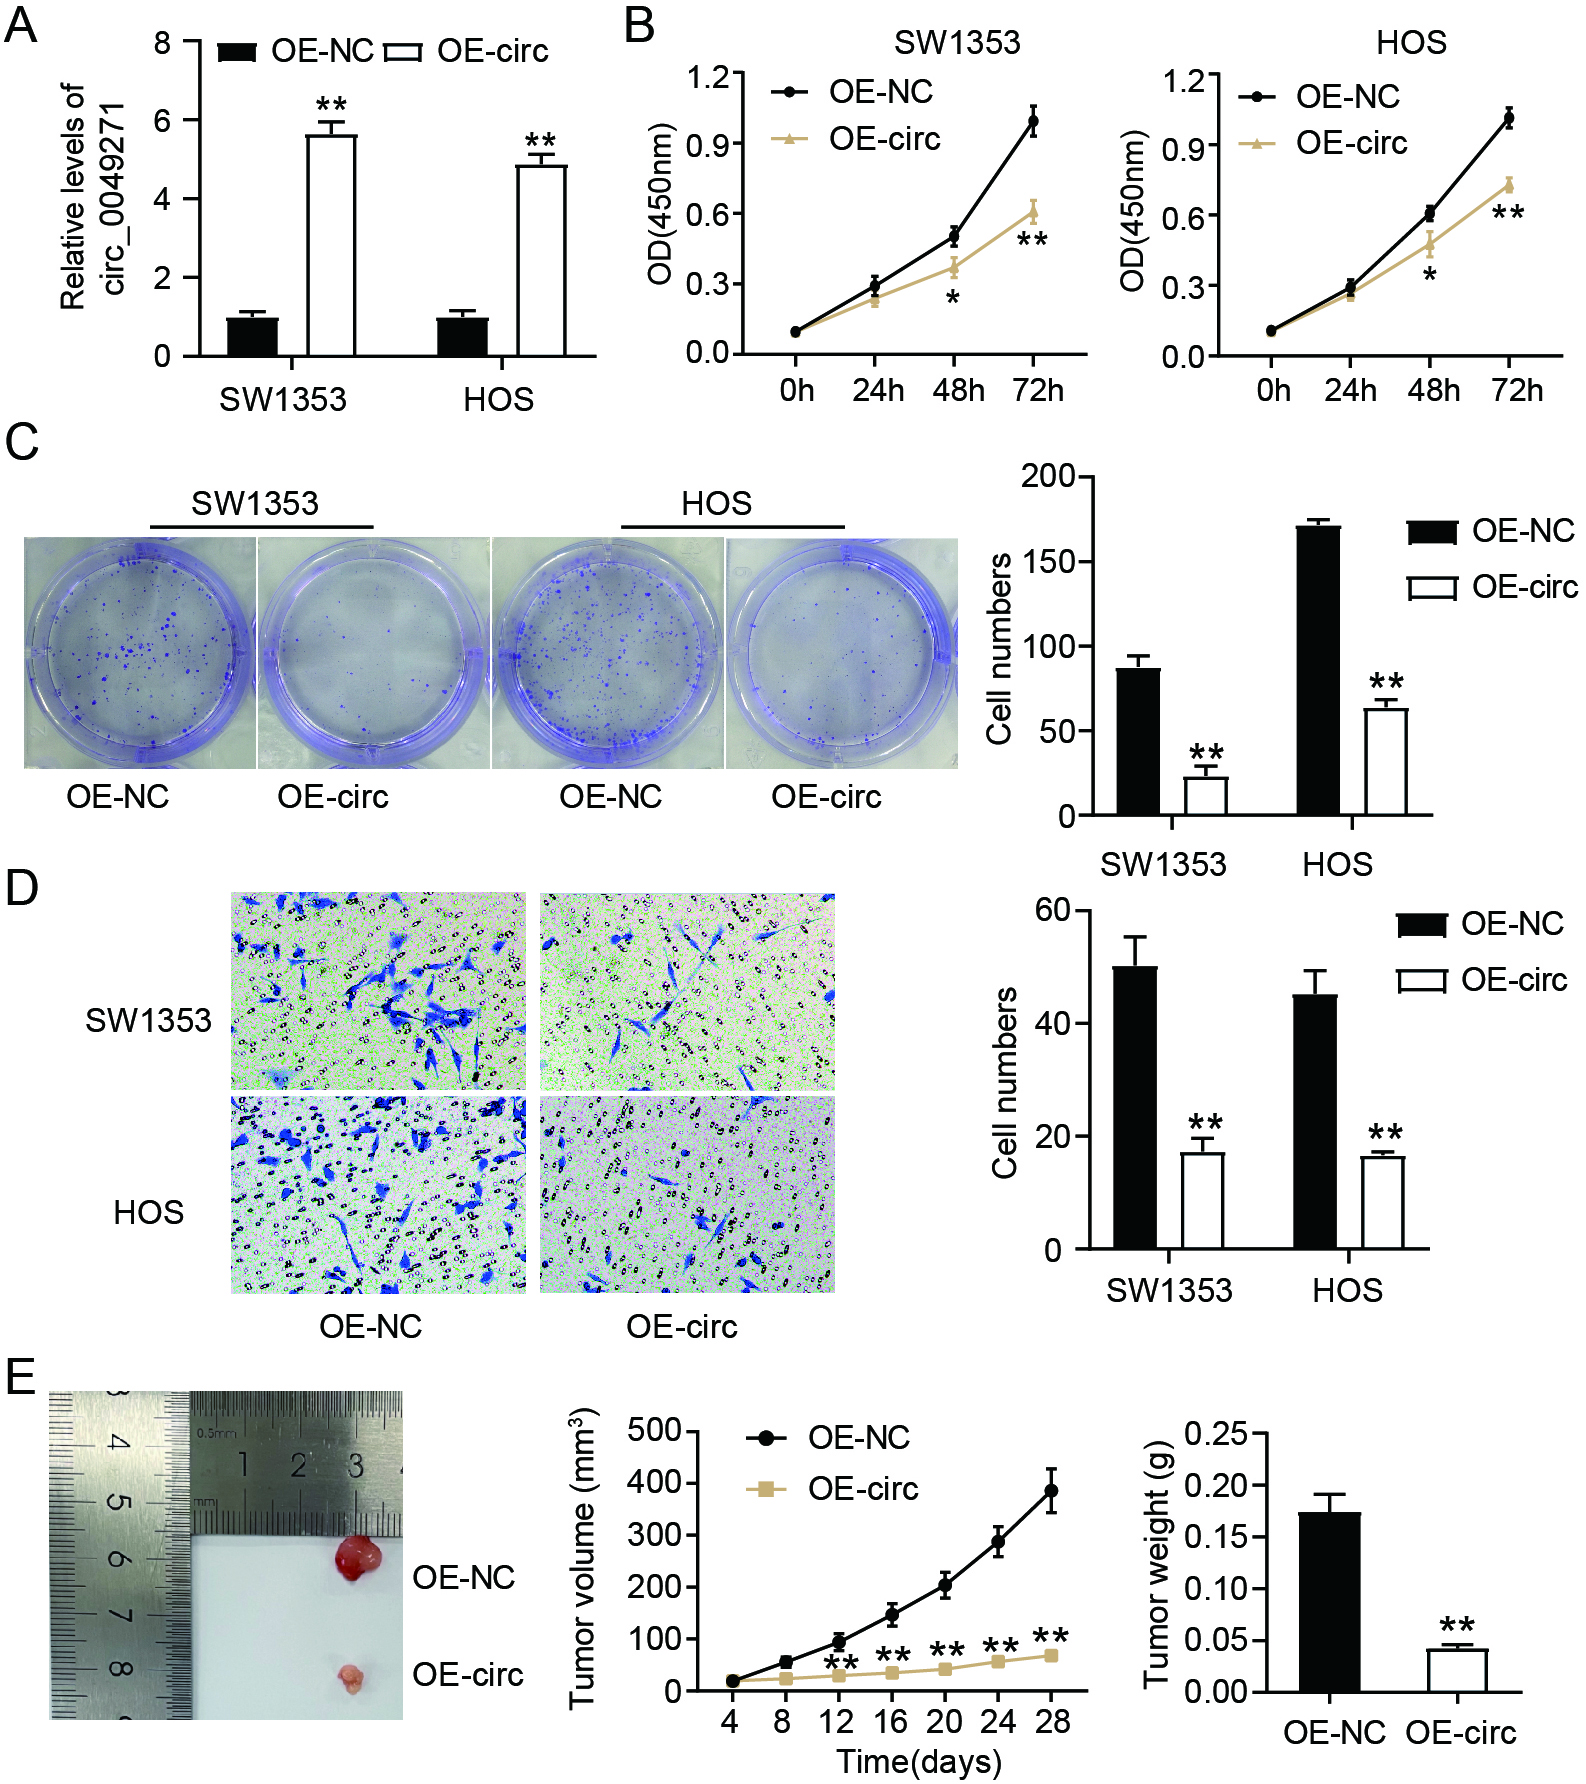 Enforced circ_0049271 suppresses the invasion and proliferation of OS cells in vitro as well as the growth of tumors in vivo. (A) Circ_0049271 levels in HOS and SW1353, following their OE-circ/NC transfection, were estimated through quantitative RT-PCR. ∗∗P < 0.01 vs. OE-NC. The viability (B) and colony numbers (C) of SW1353 and HOS cells harboring either OE-circ/NC were assessed through the CCK-8 and colony formation experiments. ∗P < 0.05, ∗∗P < 0.01 vs. OE-NC. (D) The invasive capacity of SW1353 and HOS as assessed in the transwell experiment. ∗∗P < 0.01 vs OE-NC. (E) Representative image, volume, and weight of xenograft tumors after injecting the mice with SW1353 cells stably expressing OE-circ/NC. ∗∗P < 0.01 vs. OE-NC.